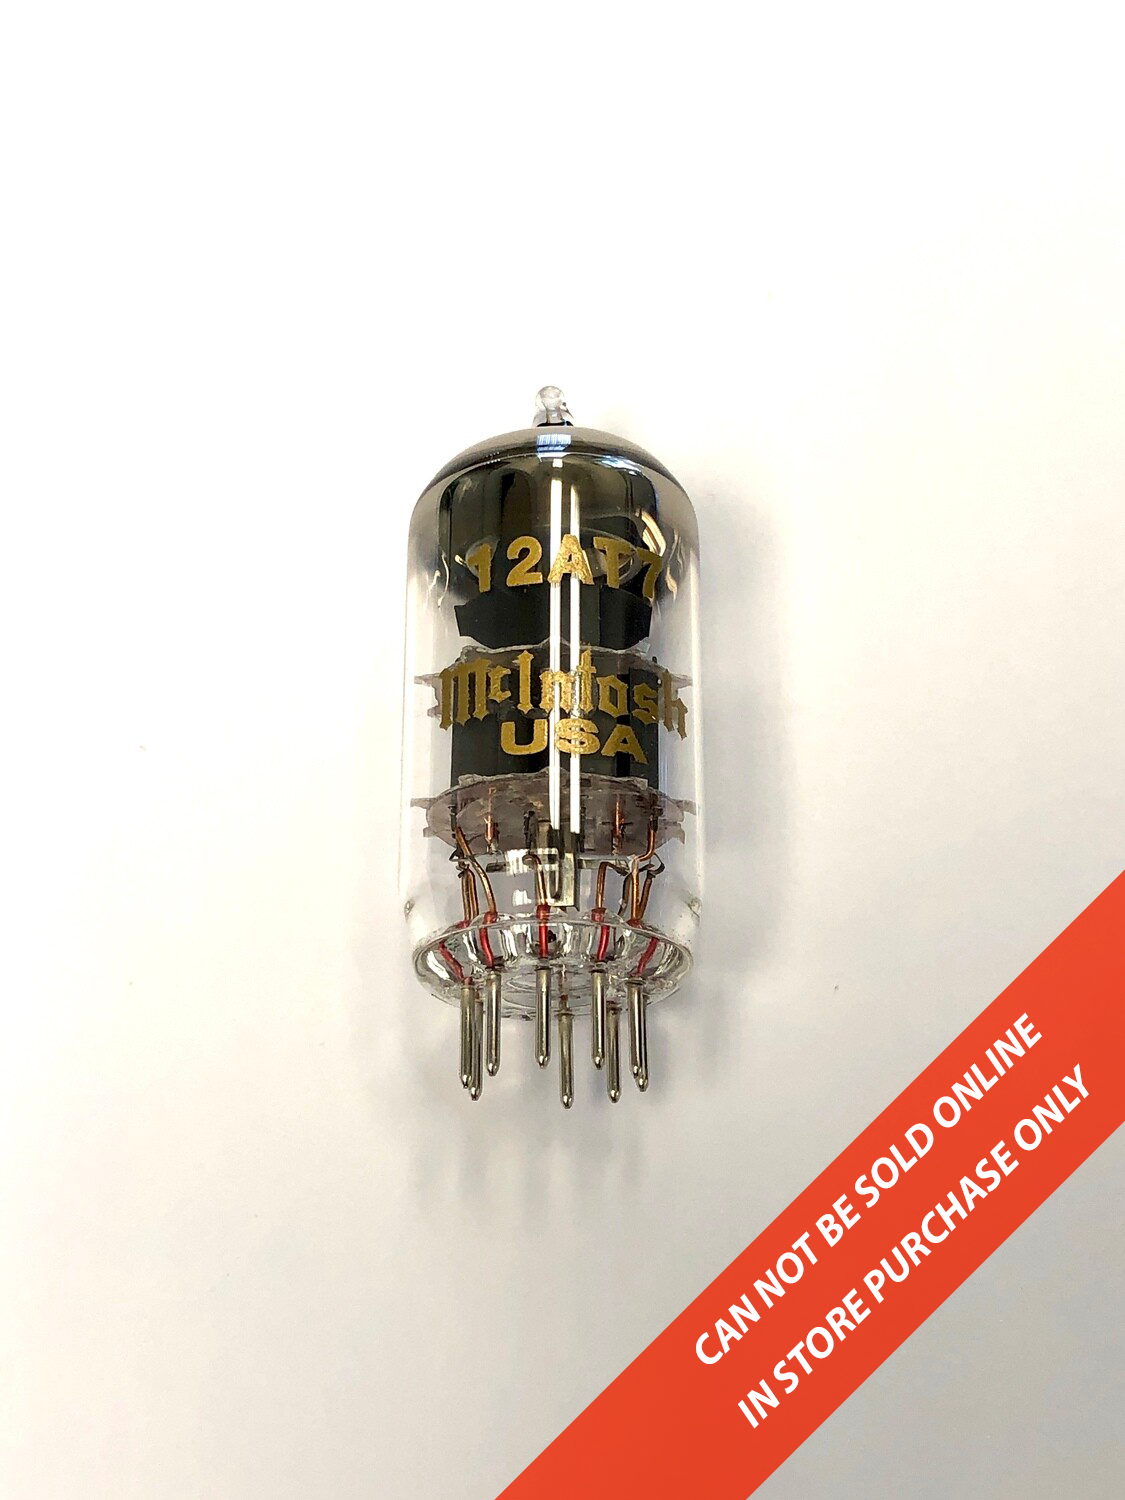 McIntosh Vacuum Tubes (In-Store Purchases Only & USD Pricing)